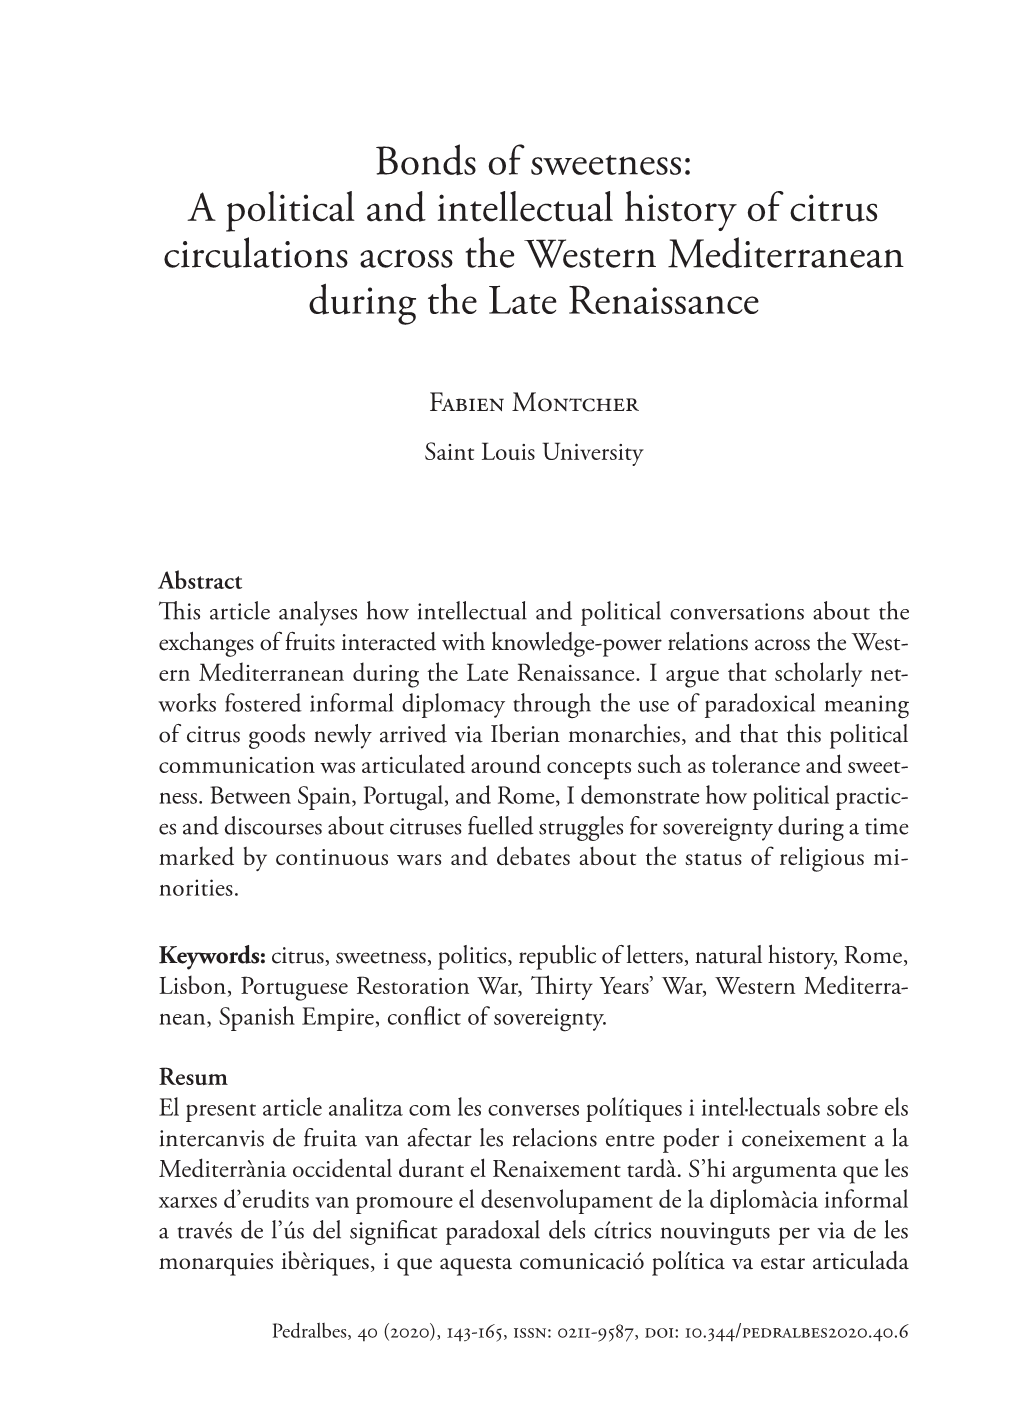 A Political and Intellectual History of Citrus Circulations Across the Western Mediterranean During the Late Renaissance